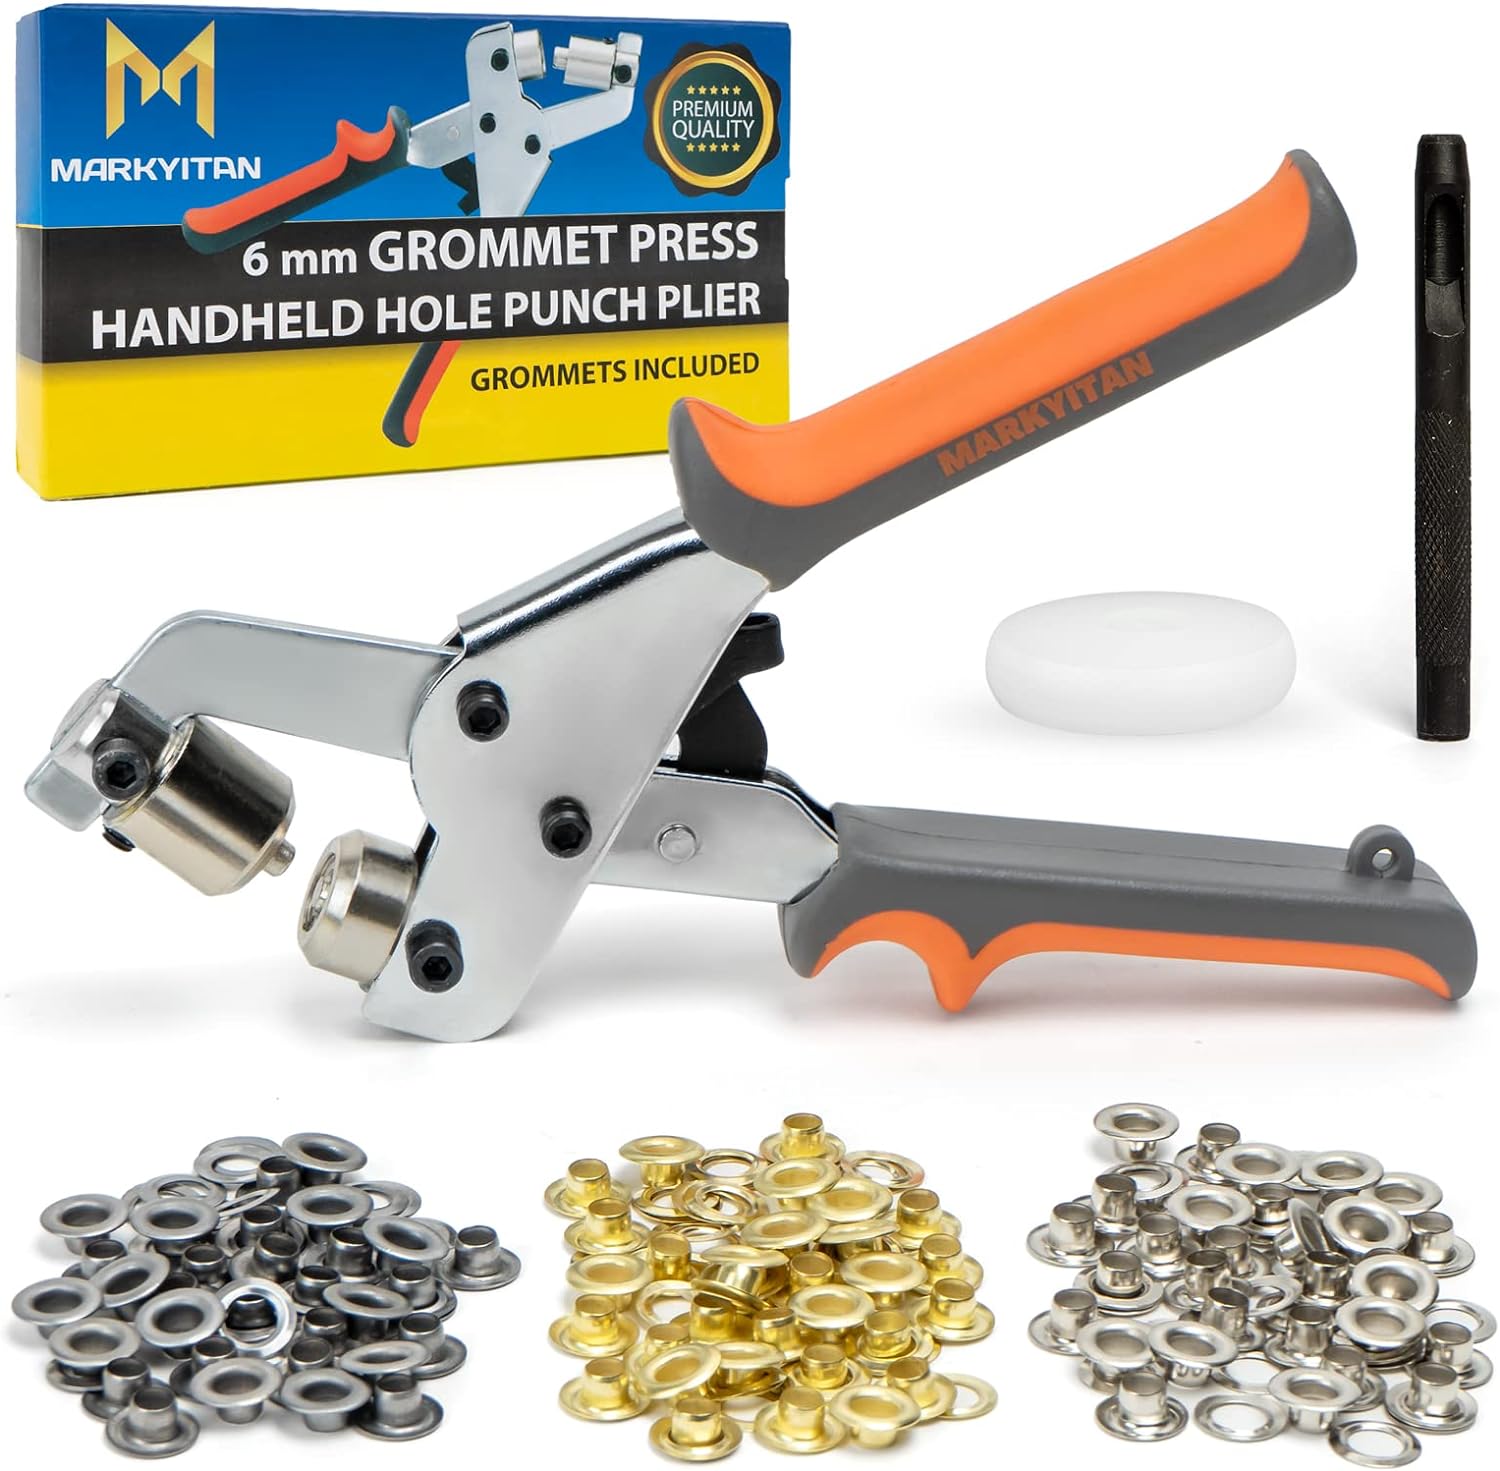 MARKYITAN 1/4 Inch (6mm) Grommet Tool Kit - Including 1 x Grommet Press Plier, 90 x Metal Grommets (Silver, Golg, and Chrome), 1 x Leathe